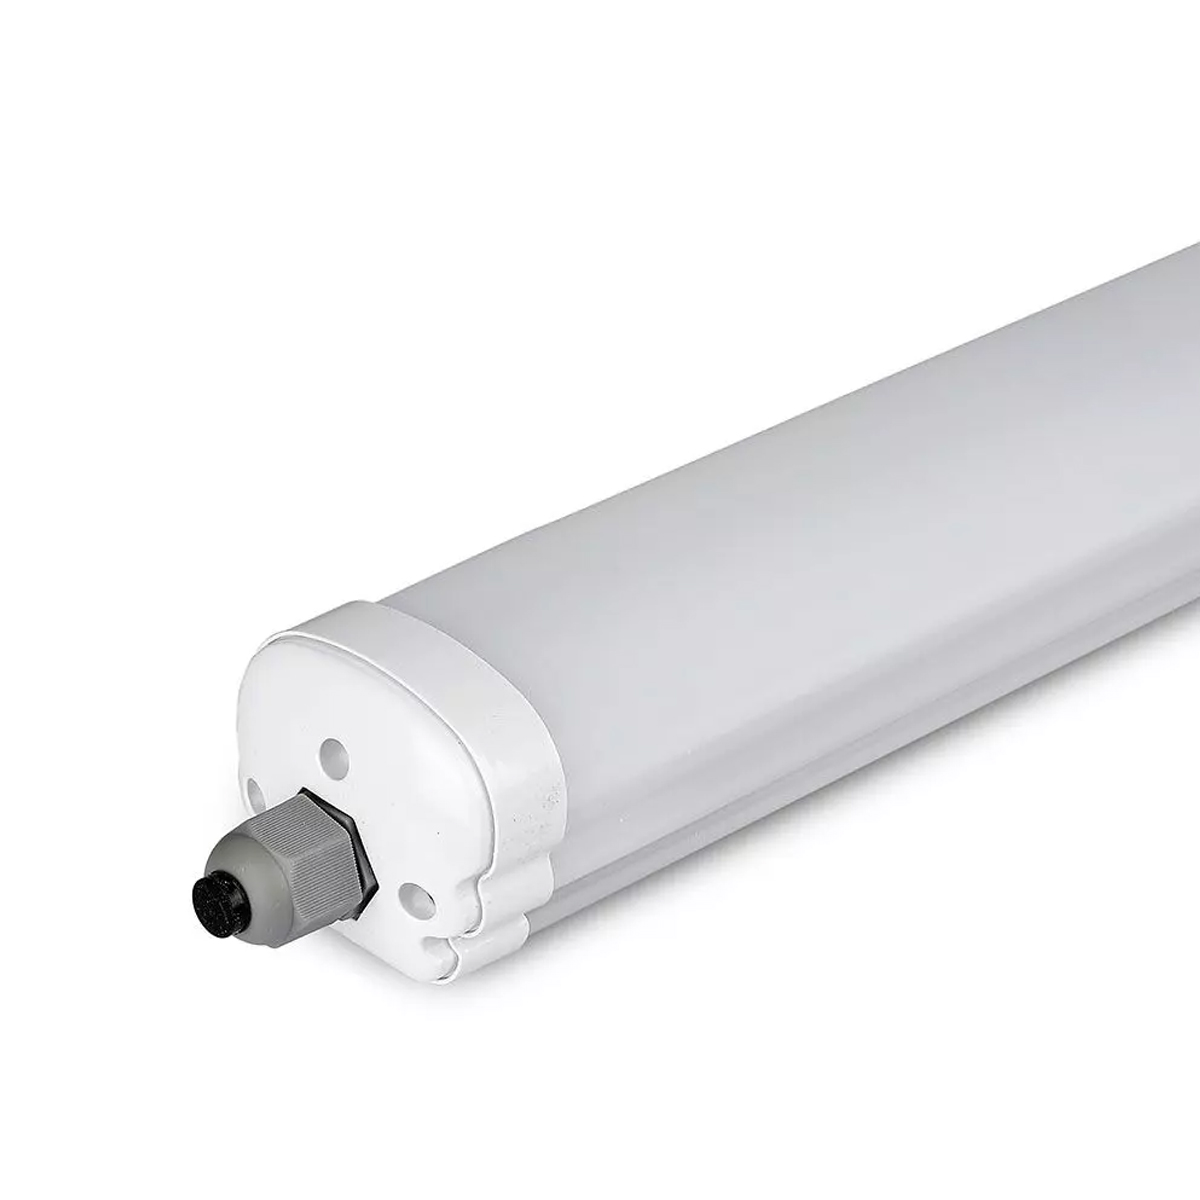 View 6FT Waterproof IP65 LED Batten Light Cool or Natural White information